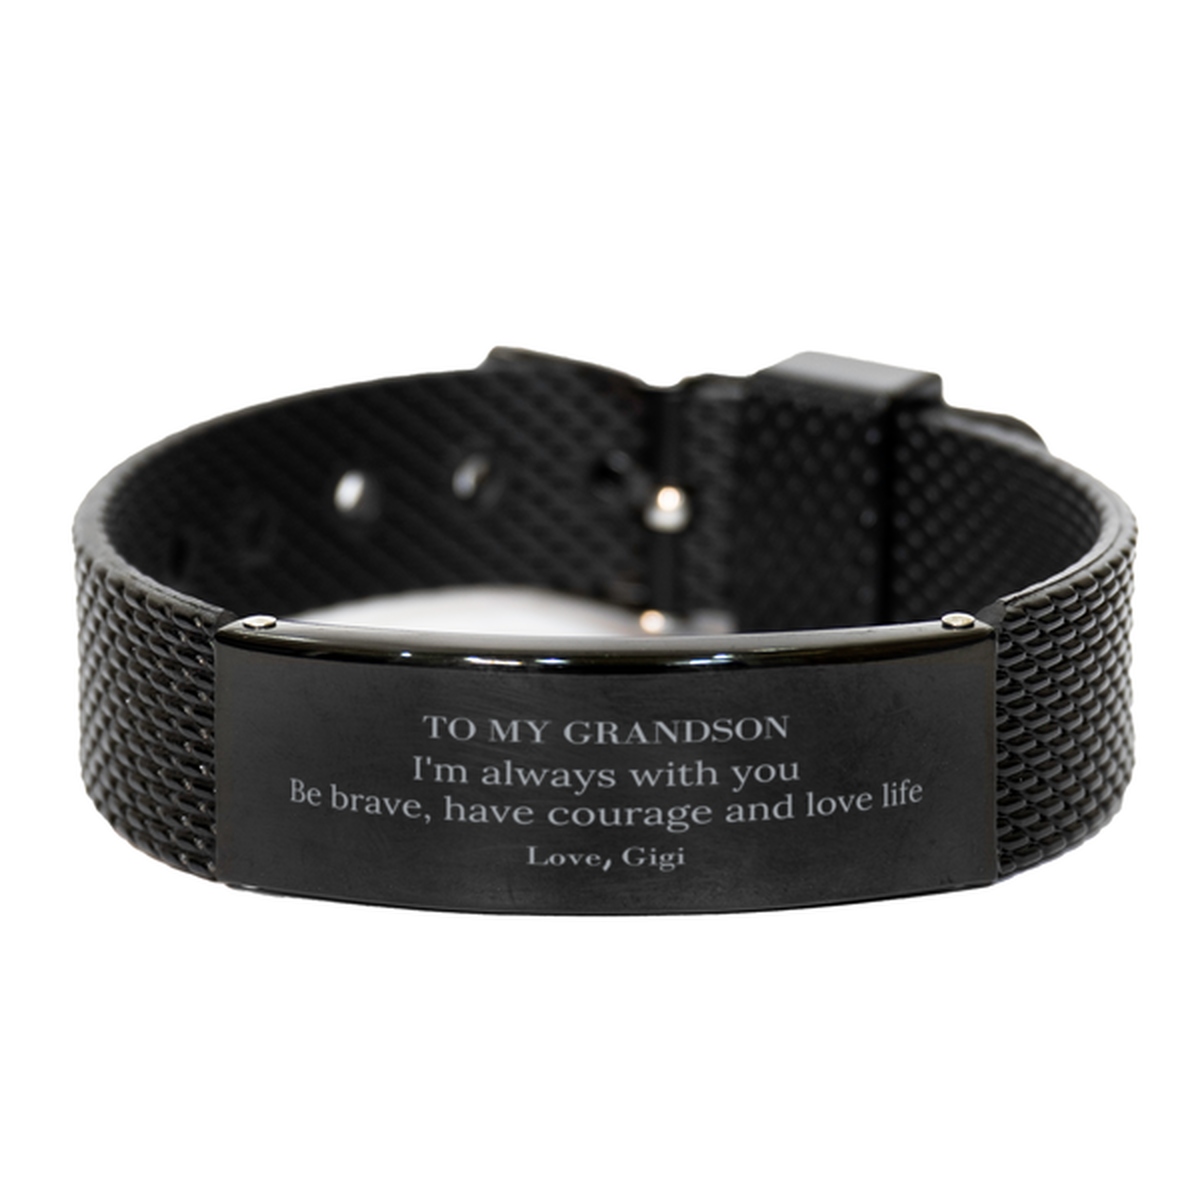 To My Grandson Gifts from Gigi, Unique Black Shark Mesh Bracelet Inspirational Christmas Birthday Graduation Gifts for Grandson I'm always with you. Be brave, have courage and love life. Love, Gigi